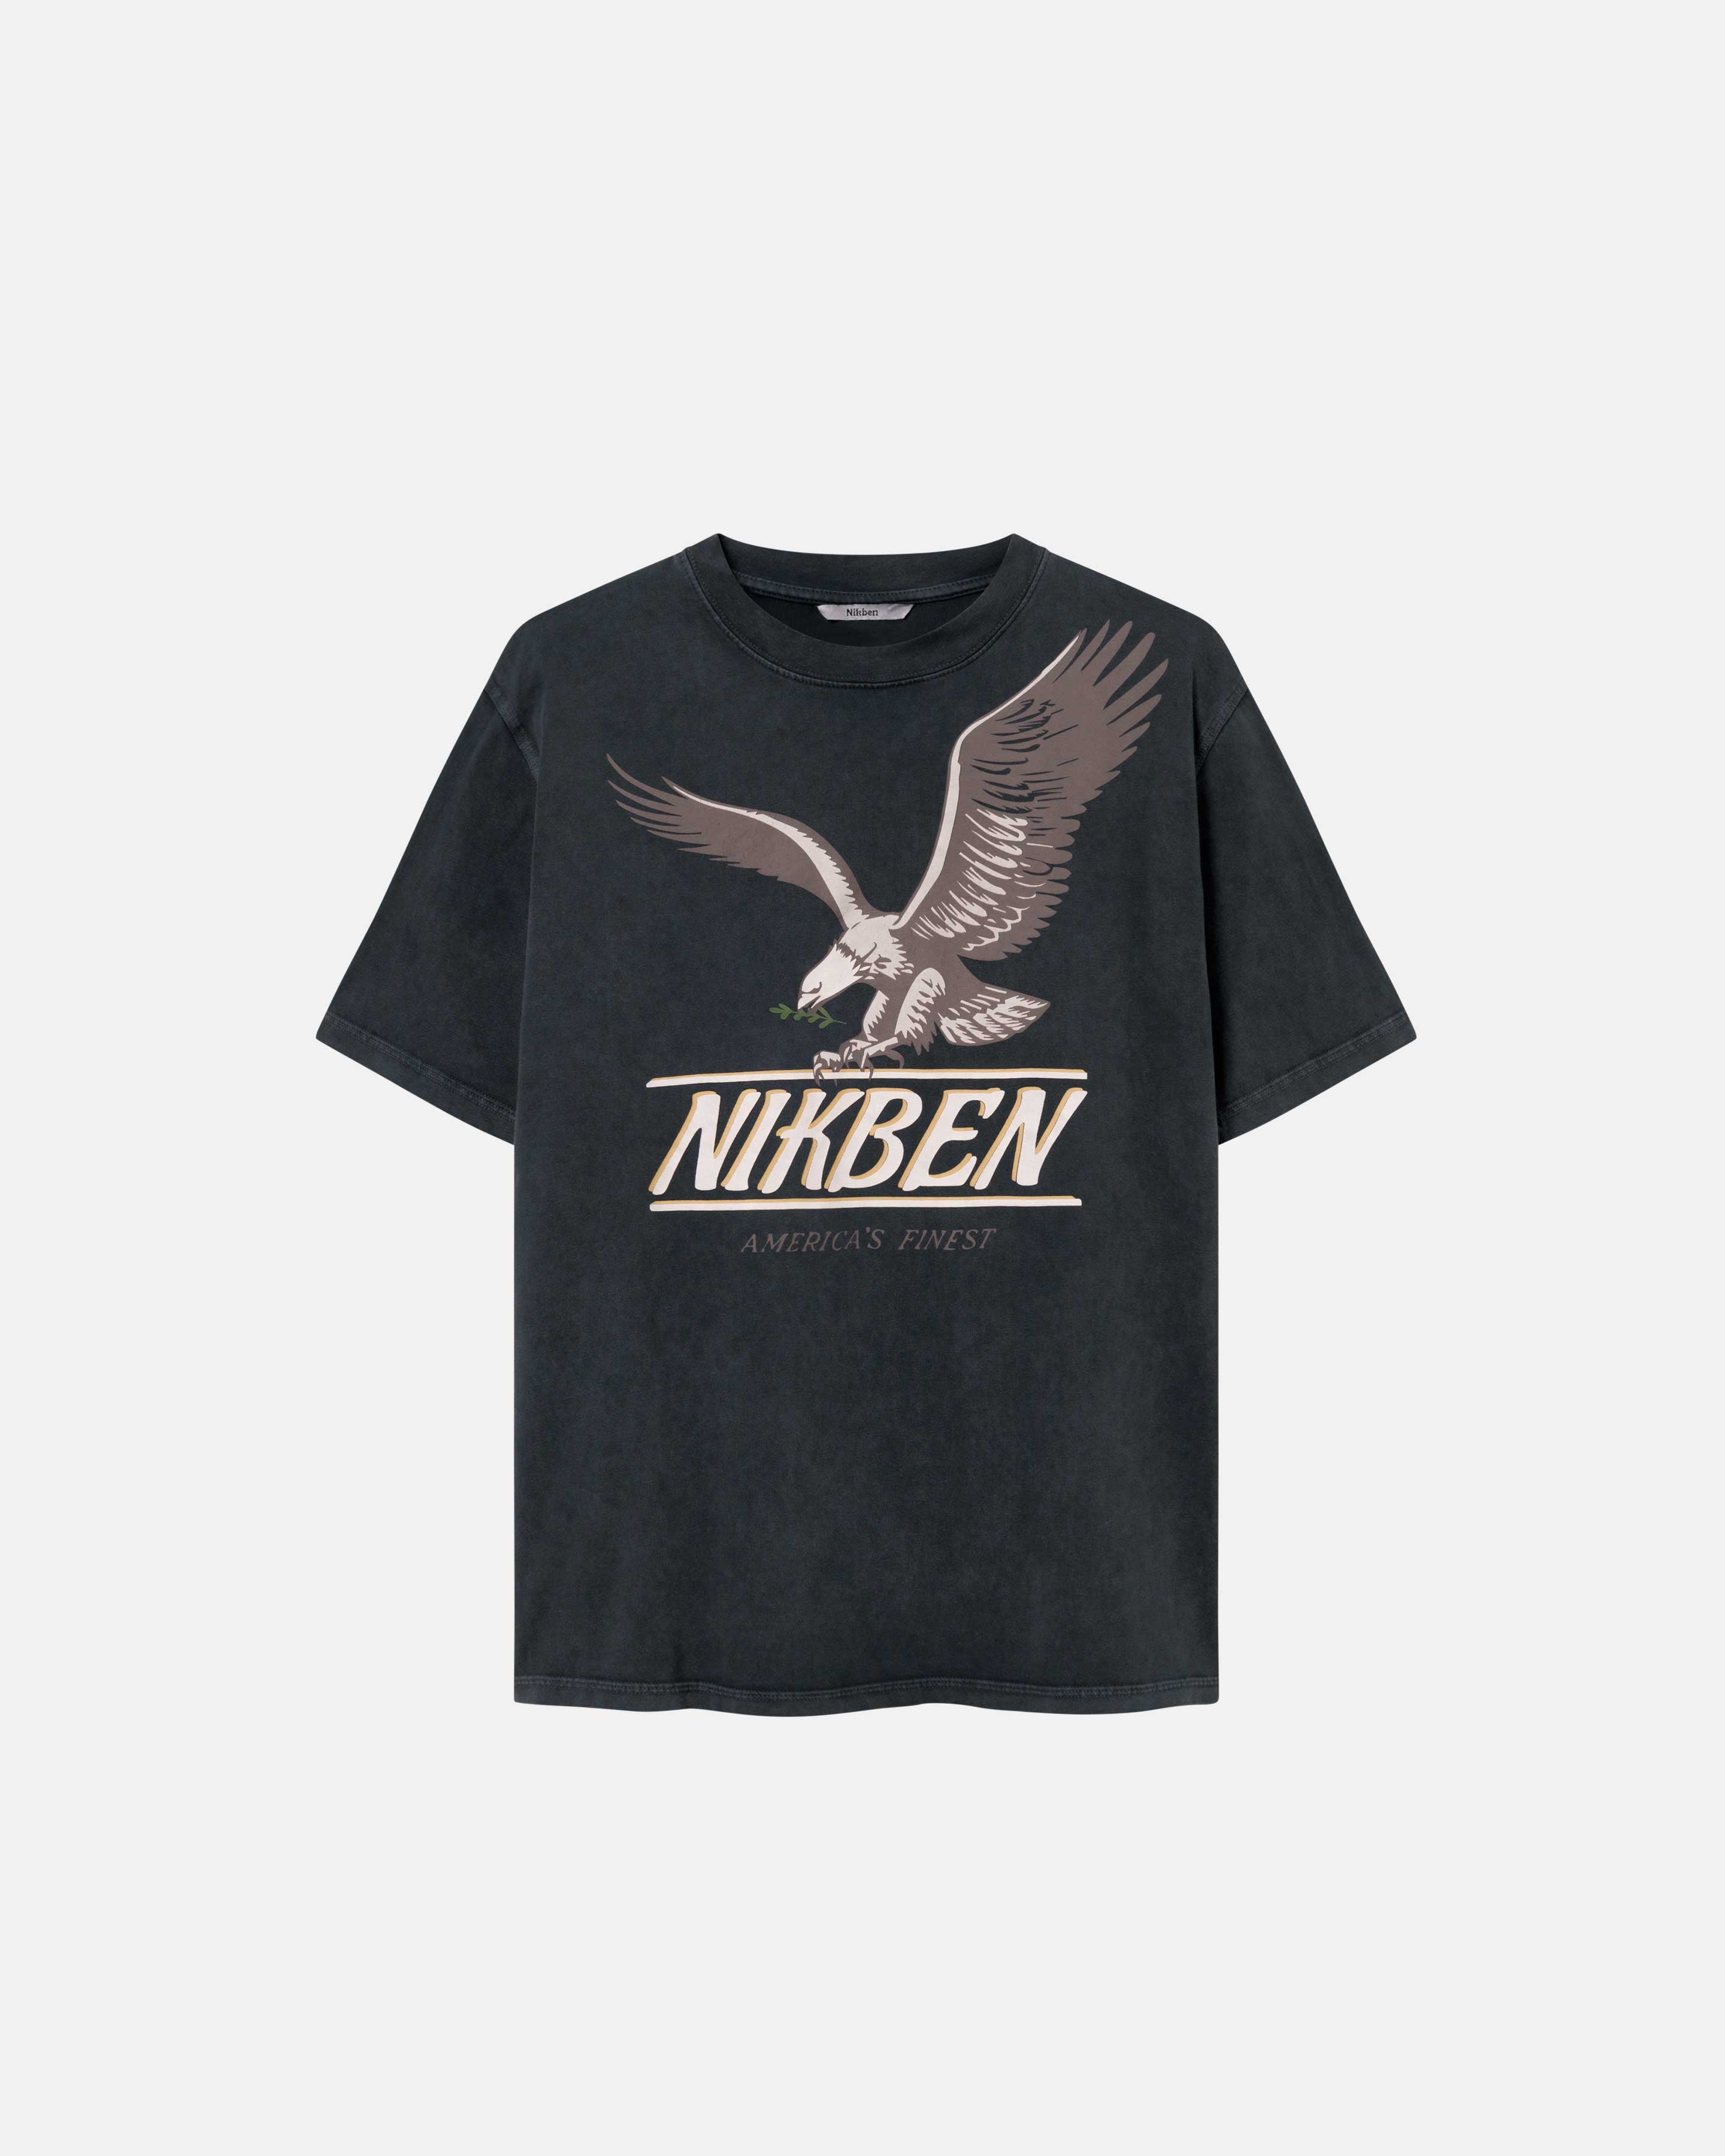 A black t-shrit with a large eagle chest print, Nikben logo and the text 